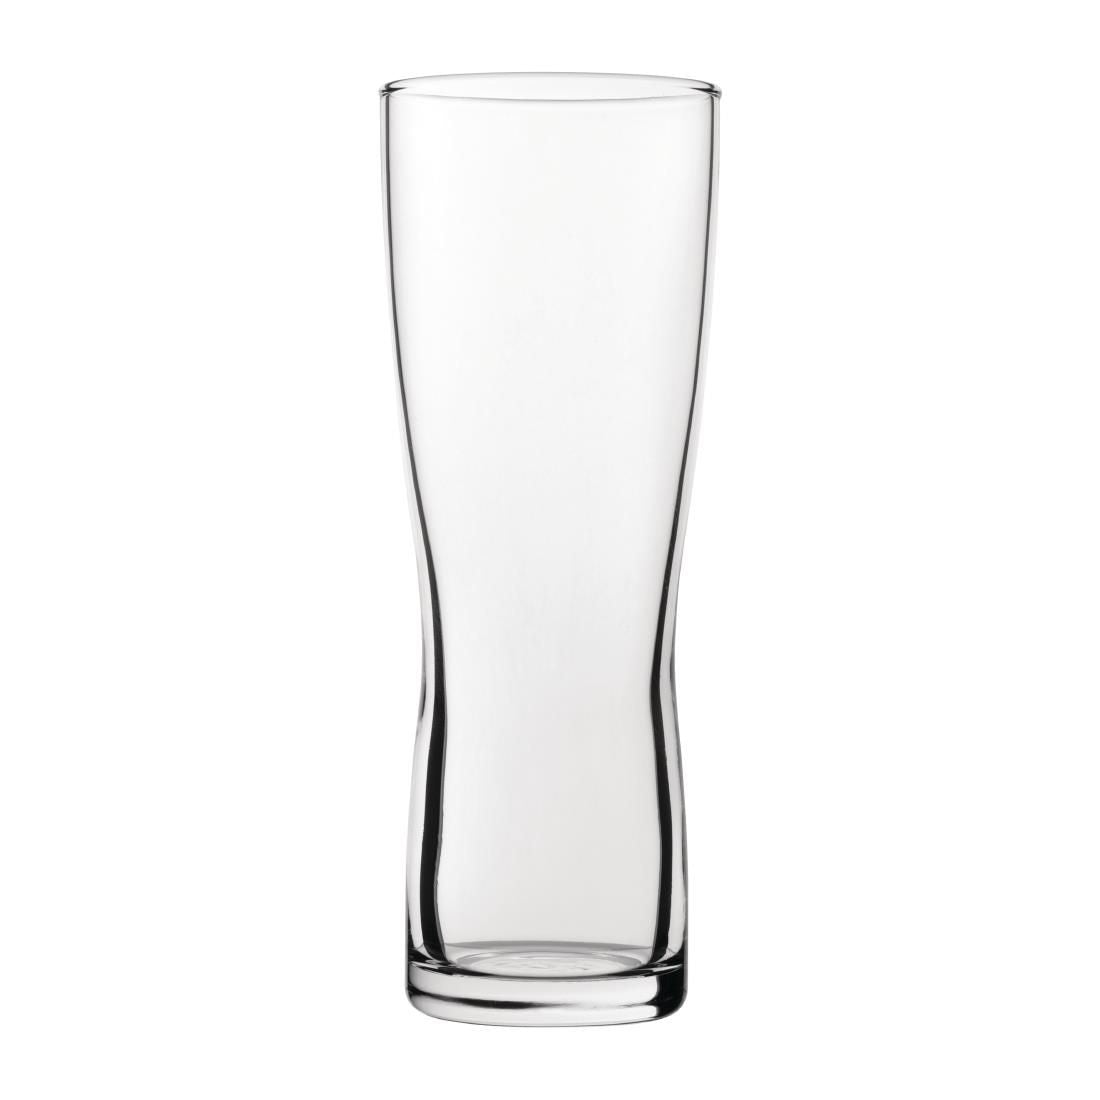 CY285 Utopia Aspen Nucleated Toughened Beer Glasses 280ml CE Marked (Pack of 24) JD Catering Equipment Solutions Ltd